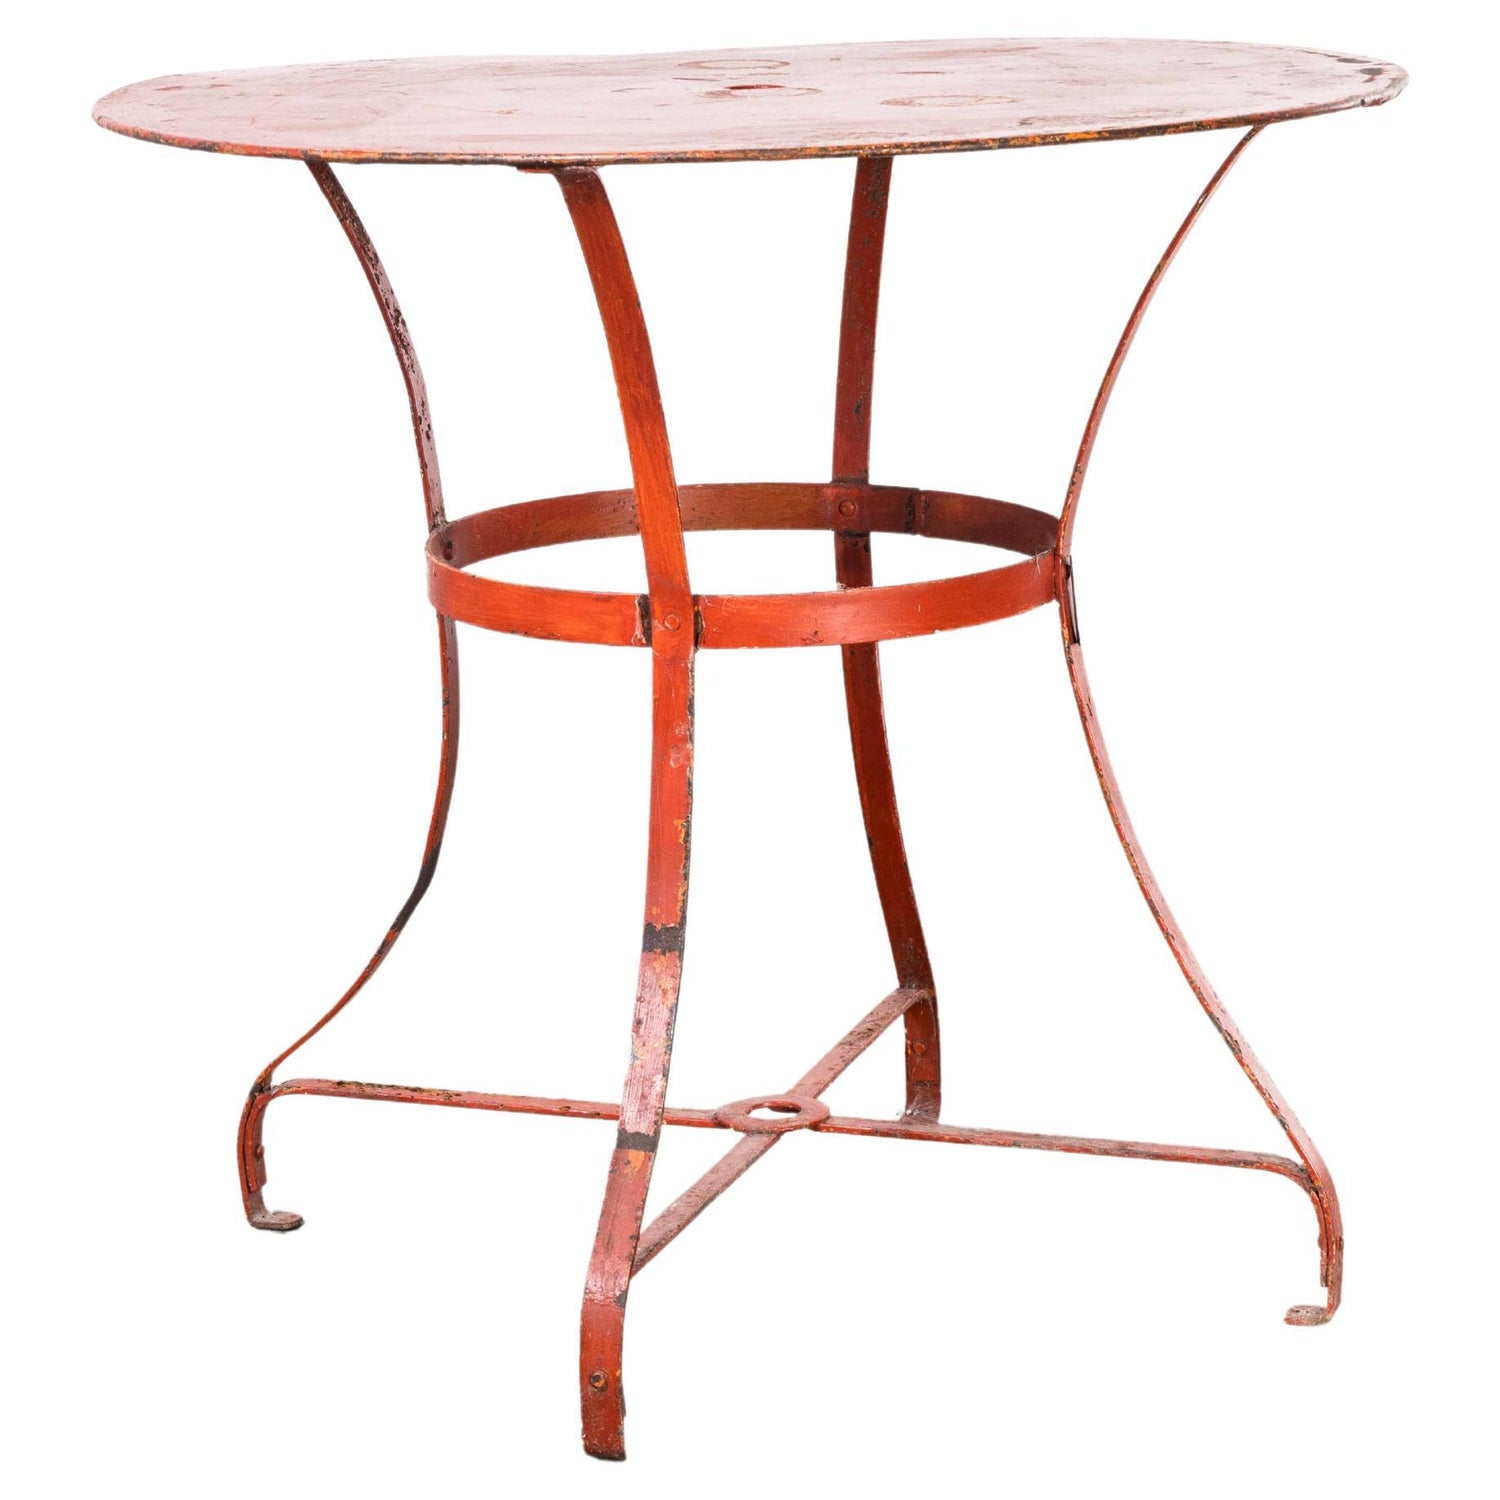 1950's Red Round French Metal Garden Dining Table For Sale at 1stDibs